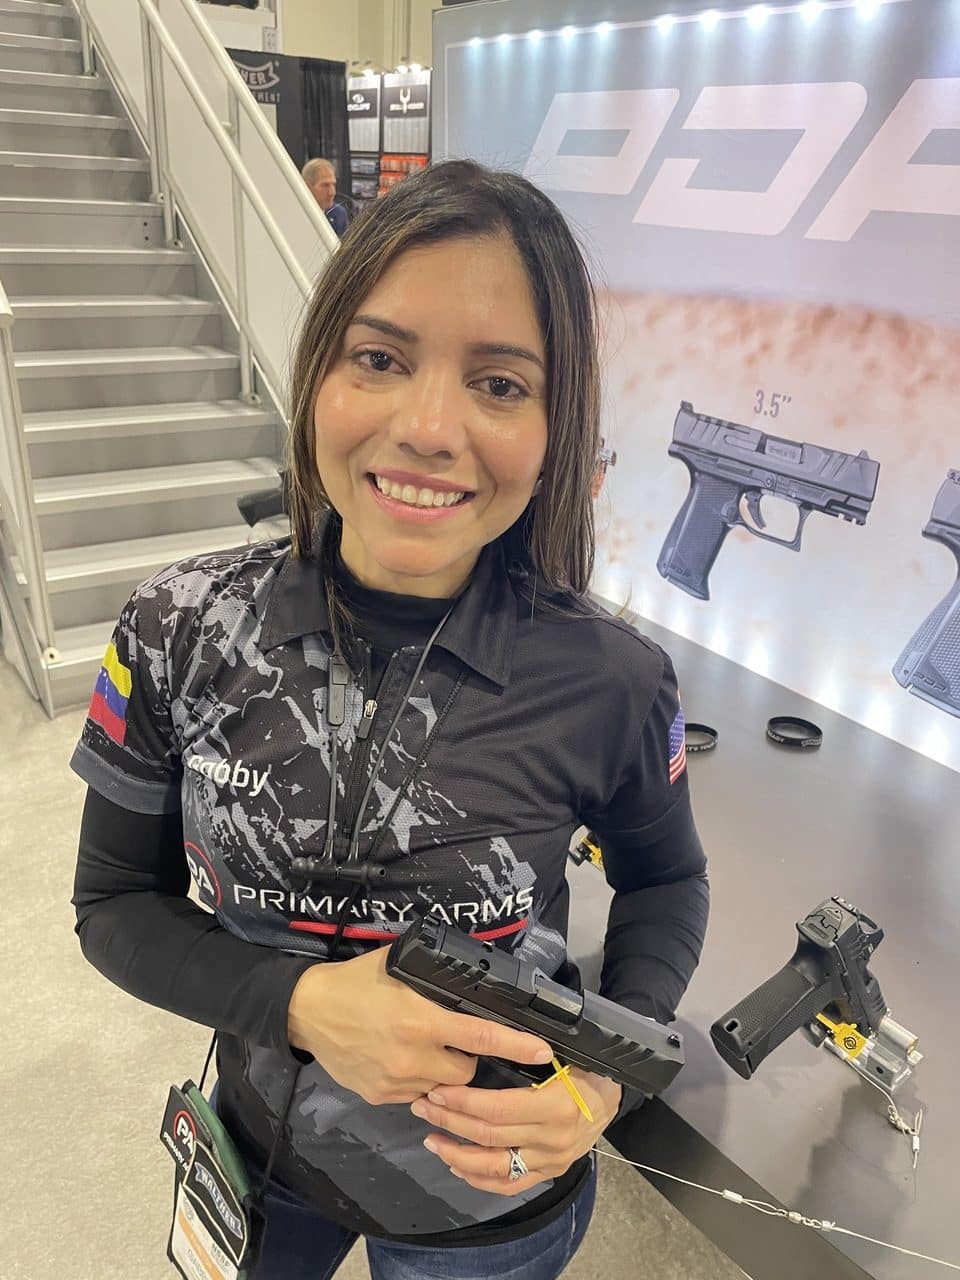 Gabby Franco F-Series PDP
What You Need to Know to Buy a Firearm